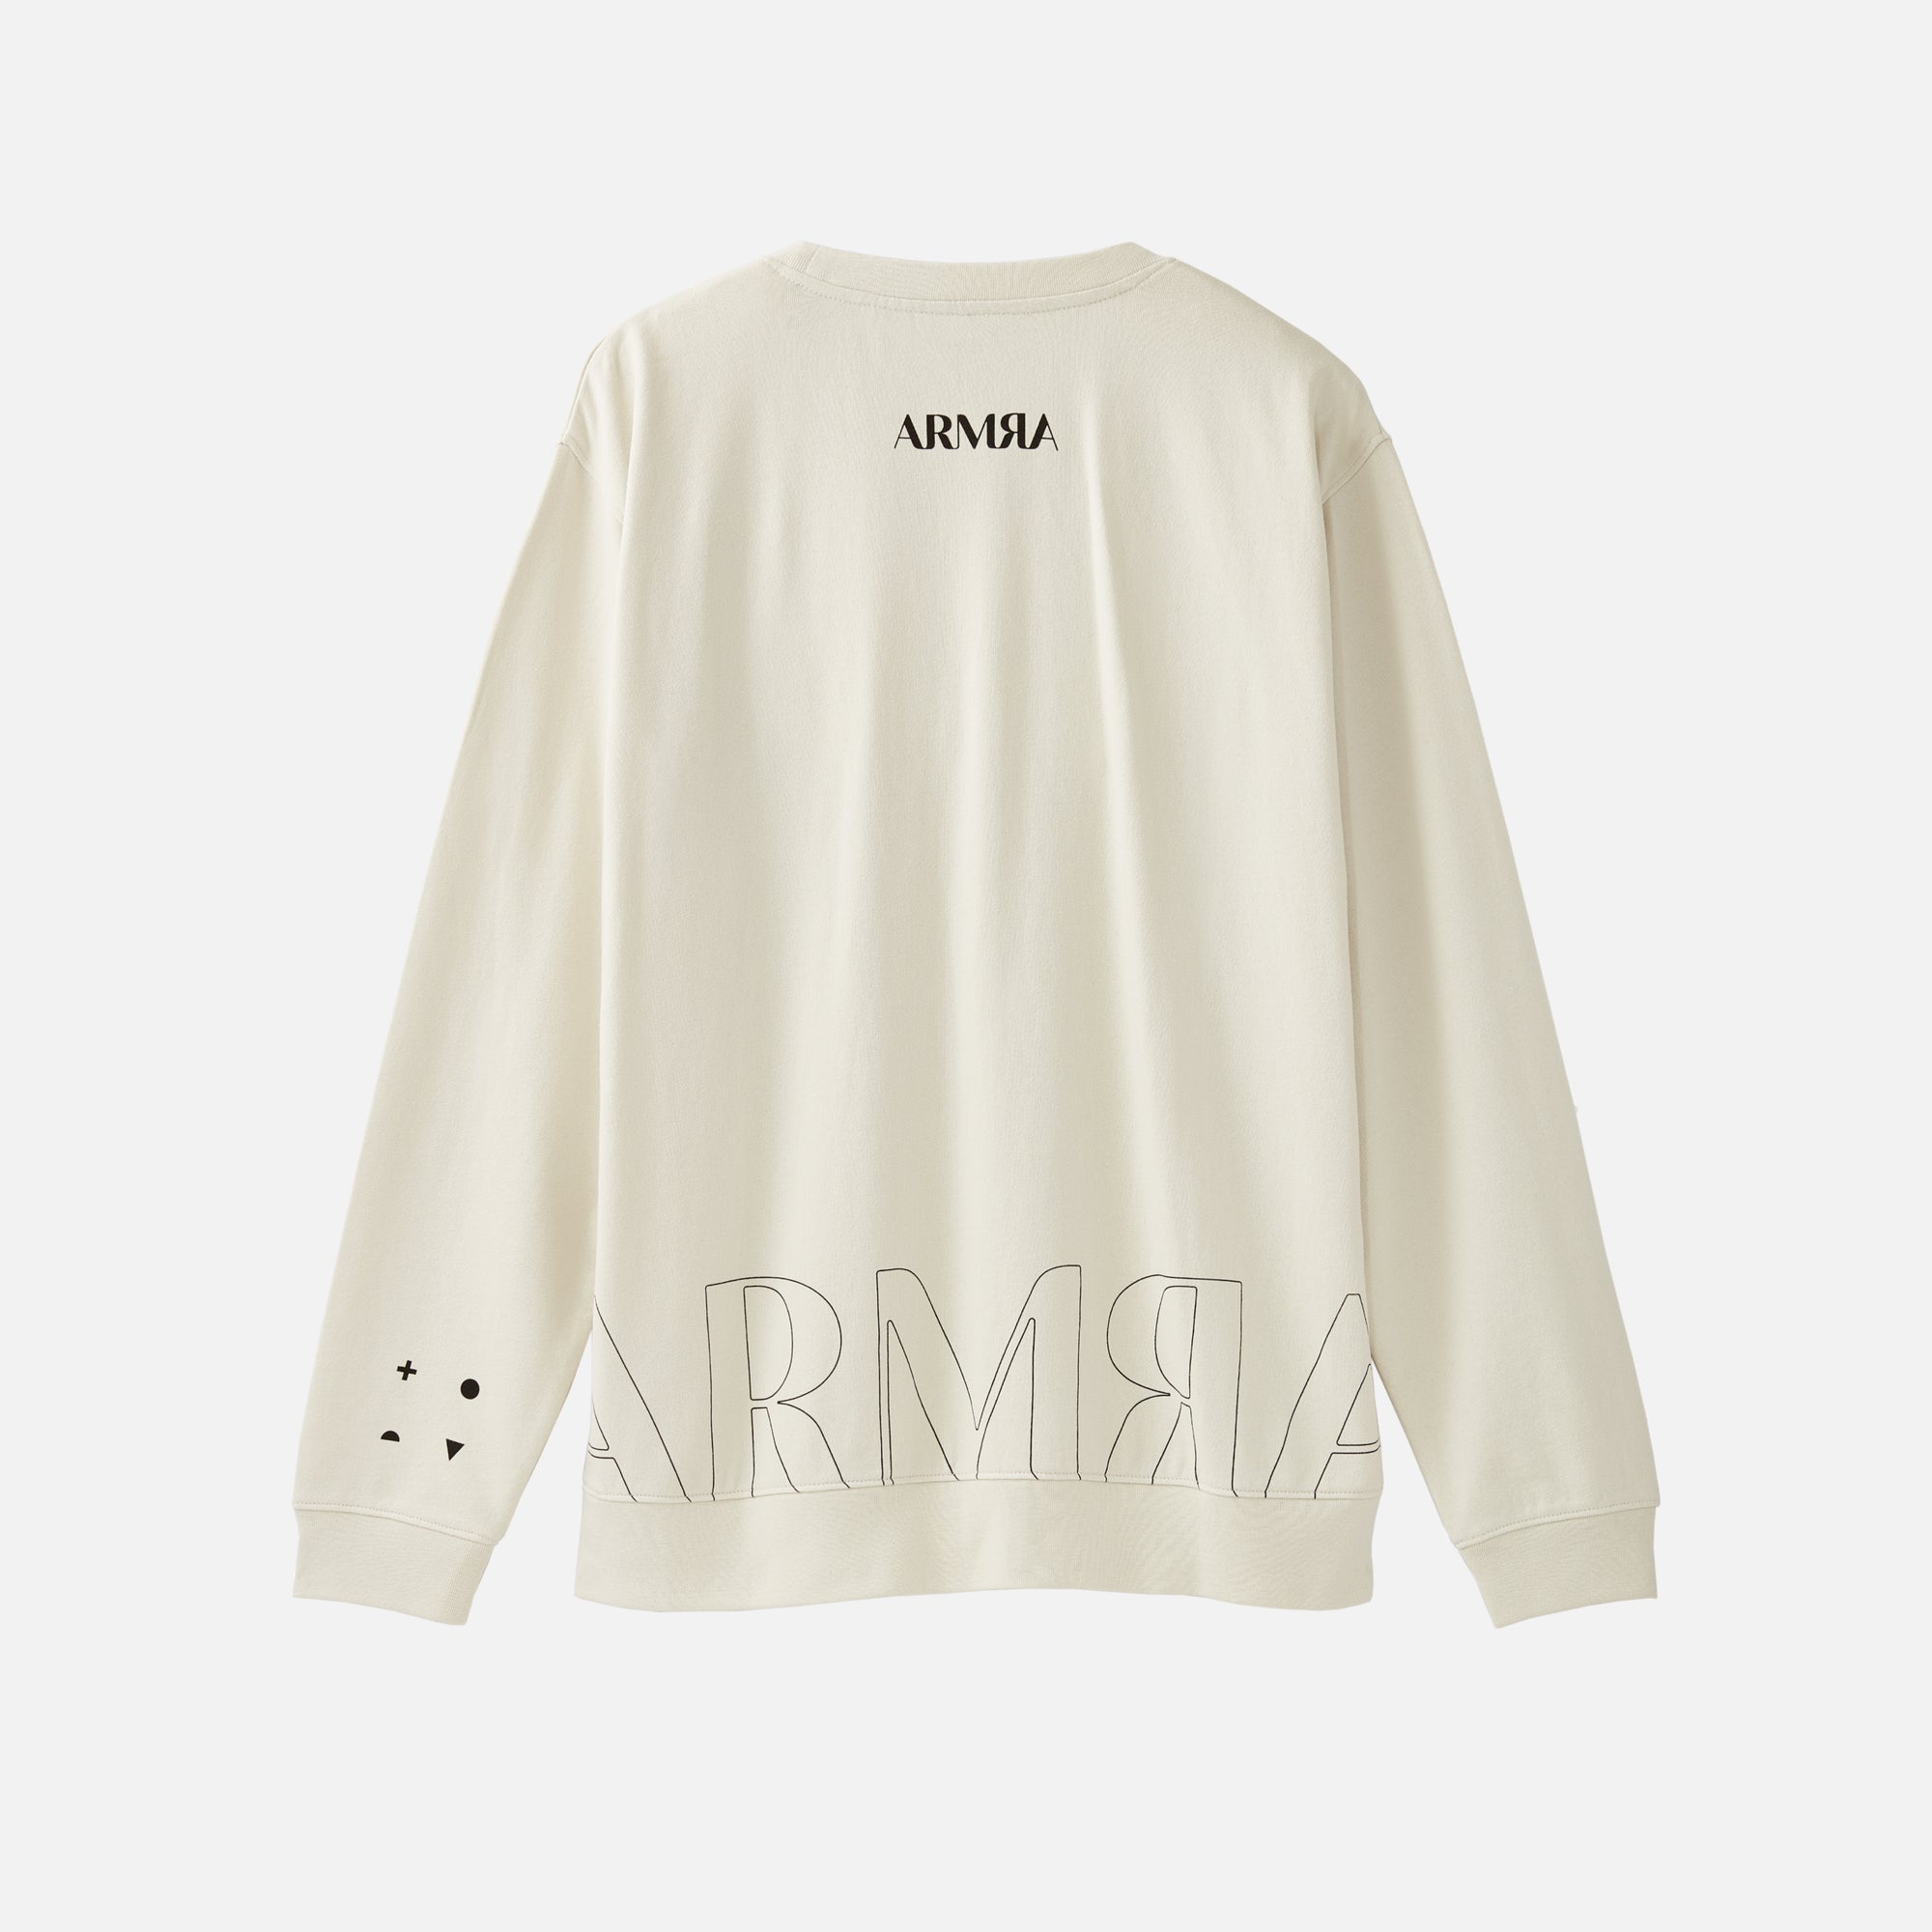 Back of a Cream Sweatshirt with ARMRA logo outline on the lower back